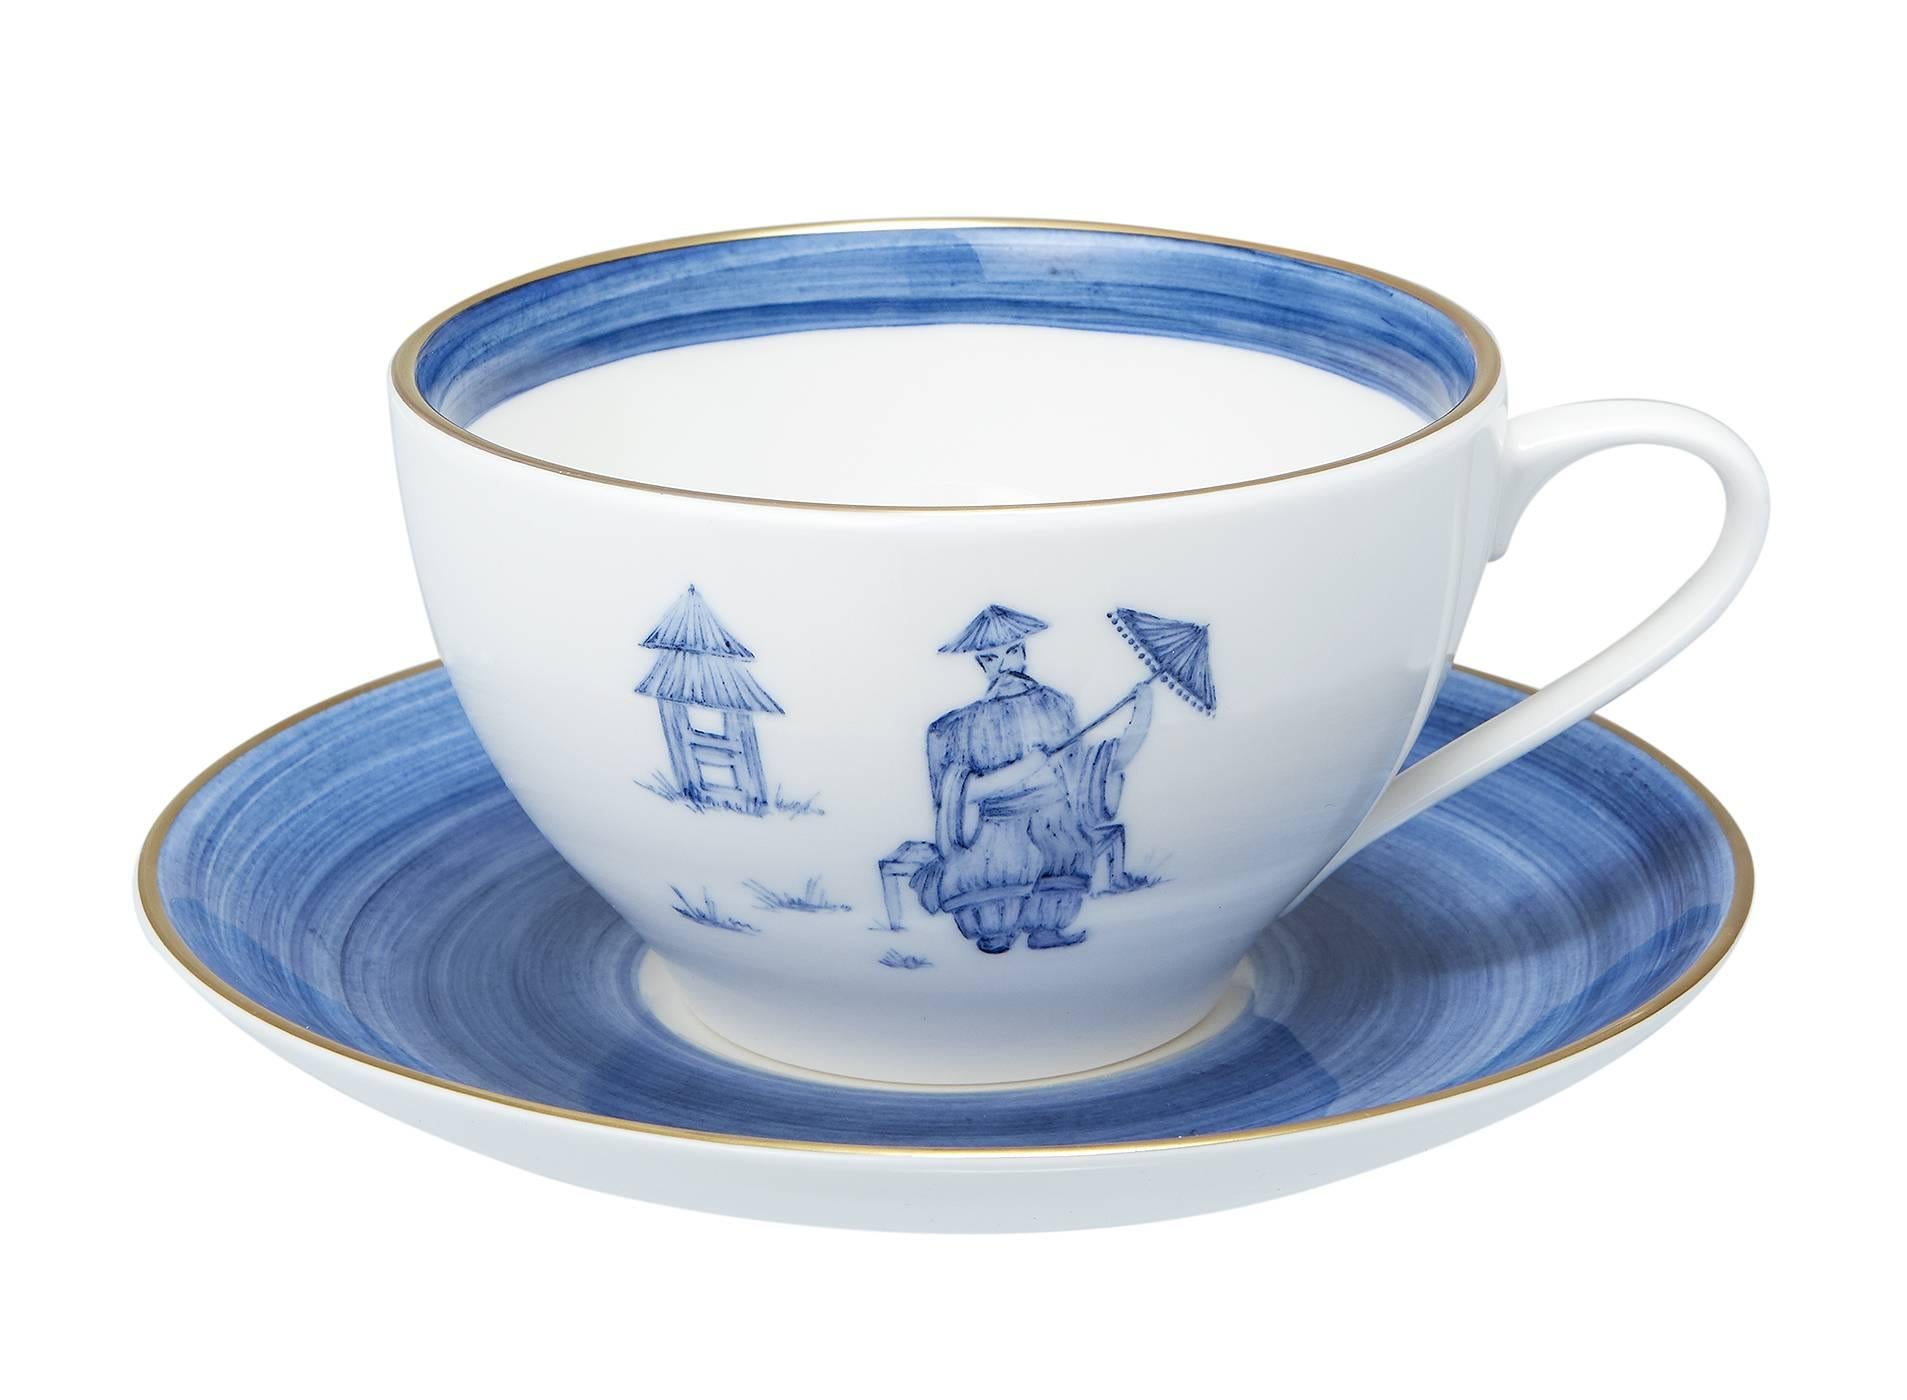 These completely handturned porcelain cups with saucers are hands-free painted in a traditional Chinese decor. Comes as a set in four different colors. Blue, pink, celadon and grey. Colors can be mixed within the set.
Rimmed with a 24-carat gold